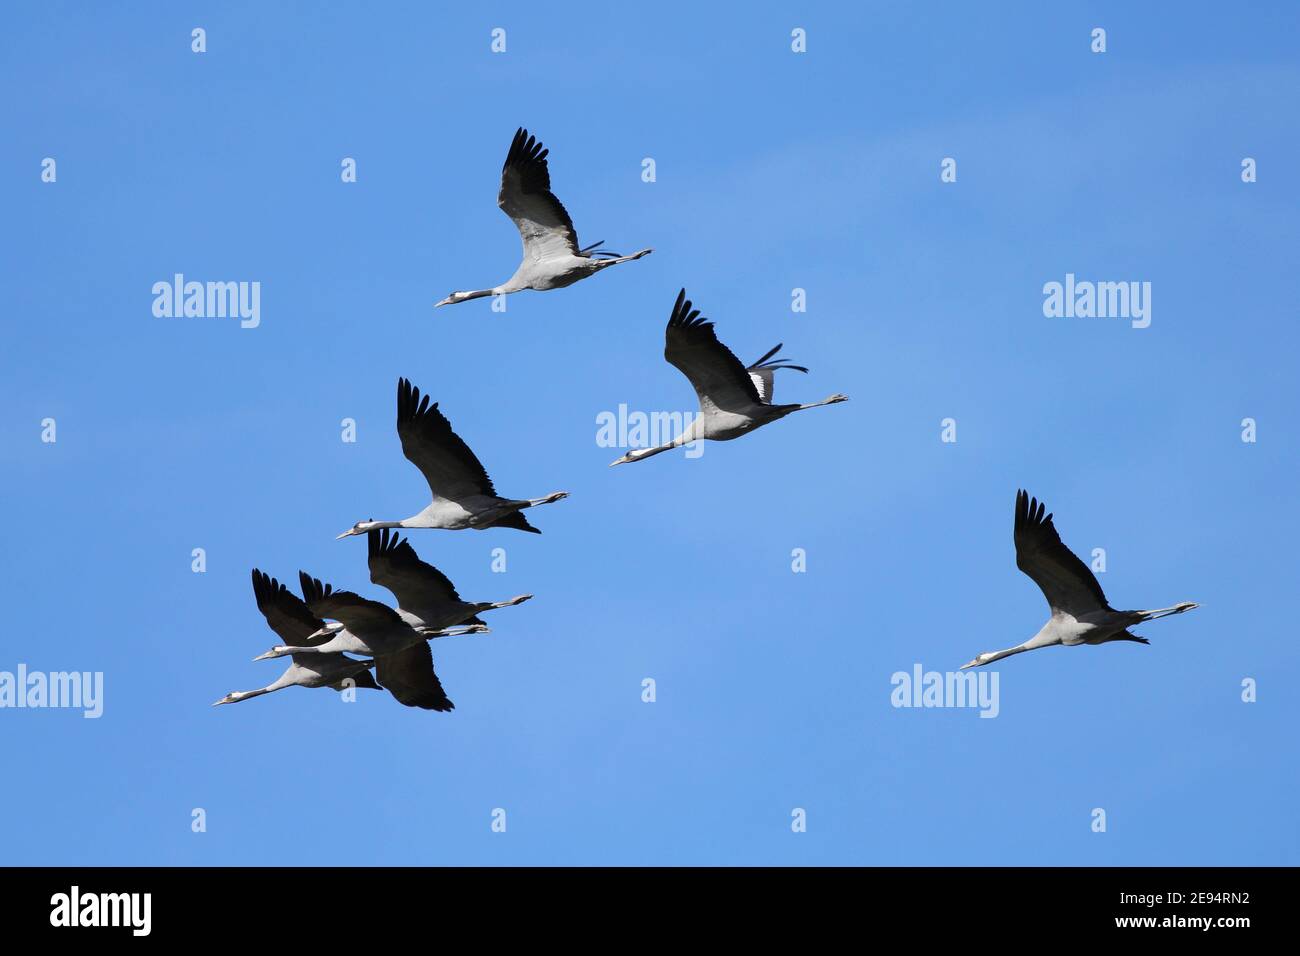 7 Common Cranes flying over Caidas de la Negra nature reserve, part of the much larger Bardenas Reales biosphere reserve, Navarre, Spain Stock Photo